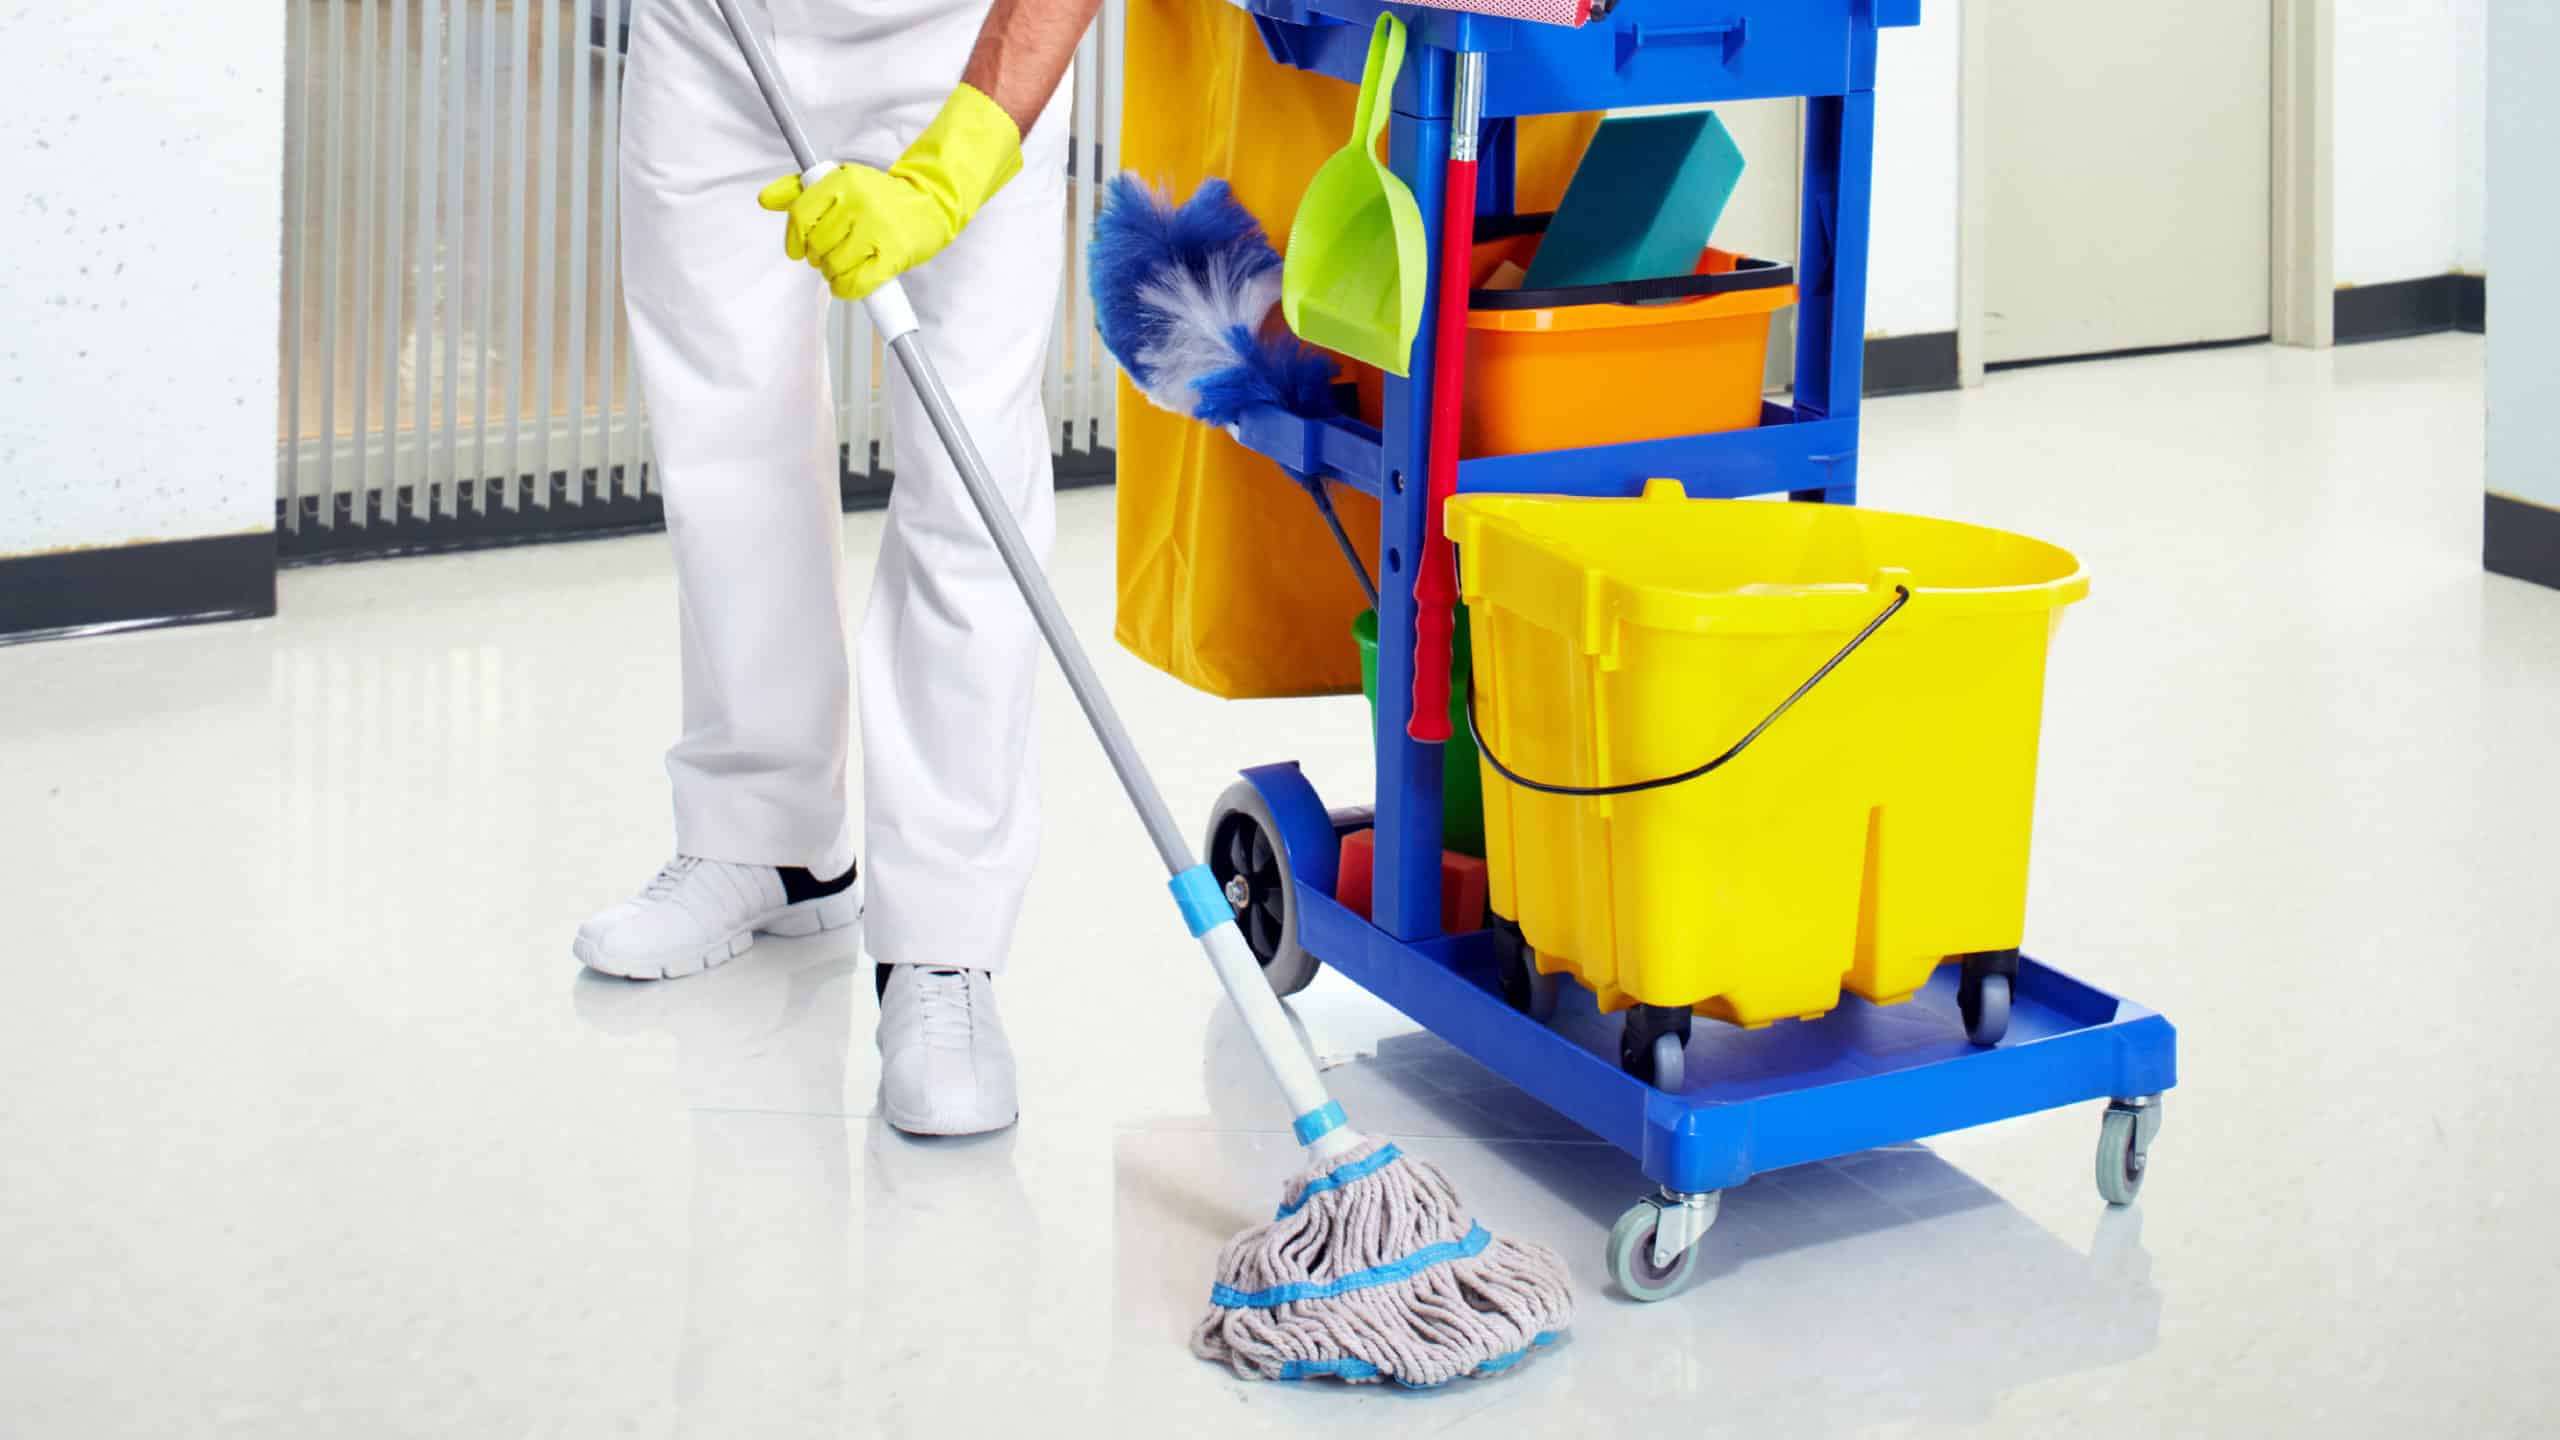 The Old Mop is a Flop: Why Schools Need to Ditch Mops For Good featured image